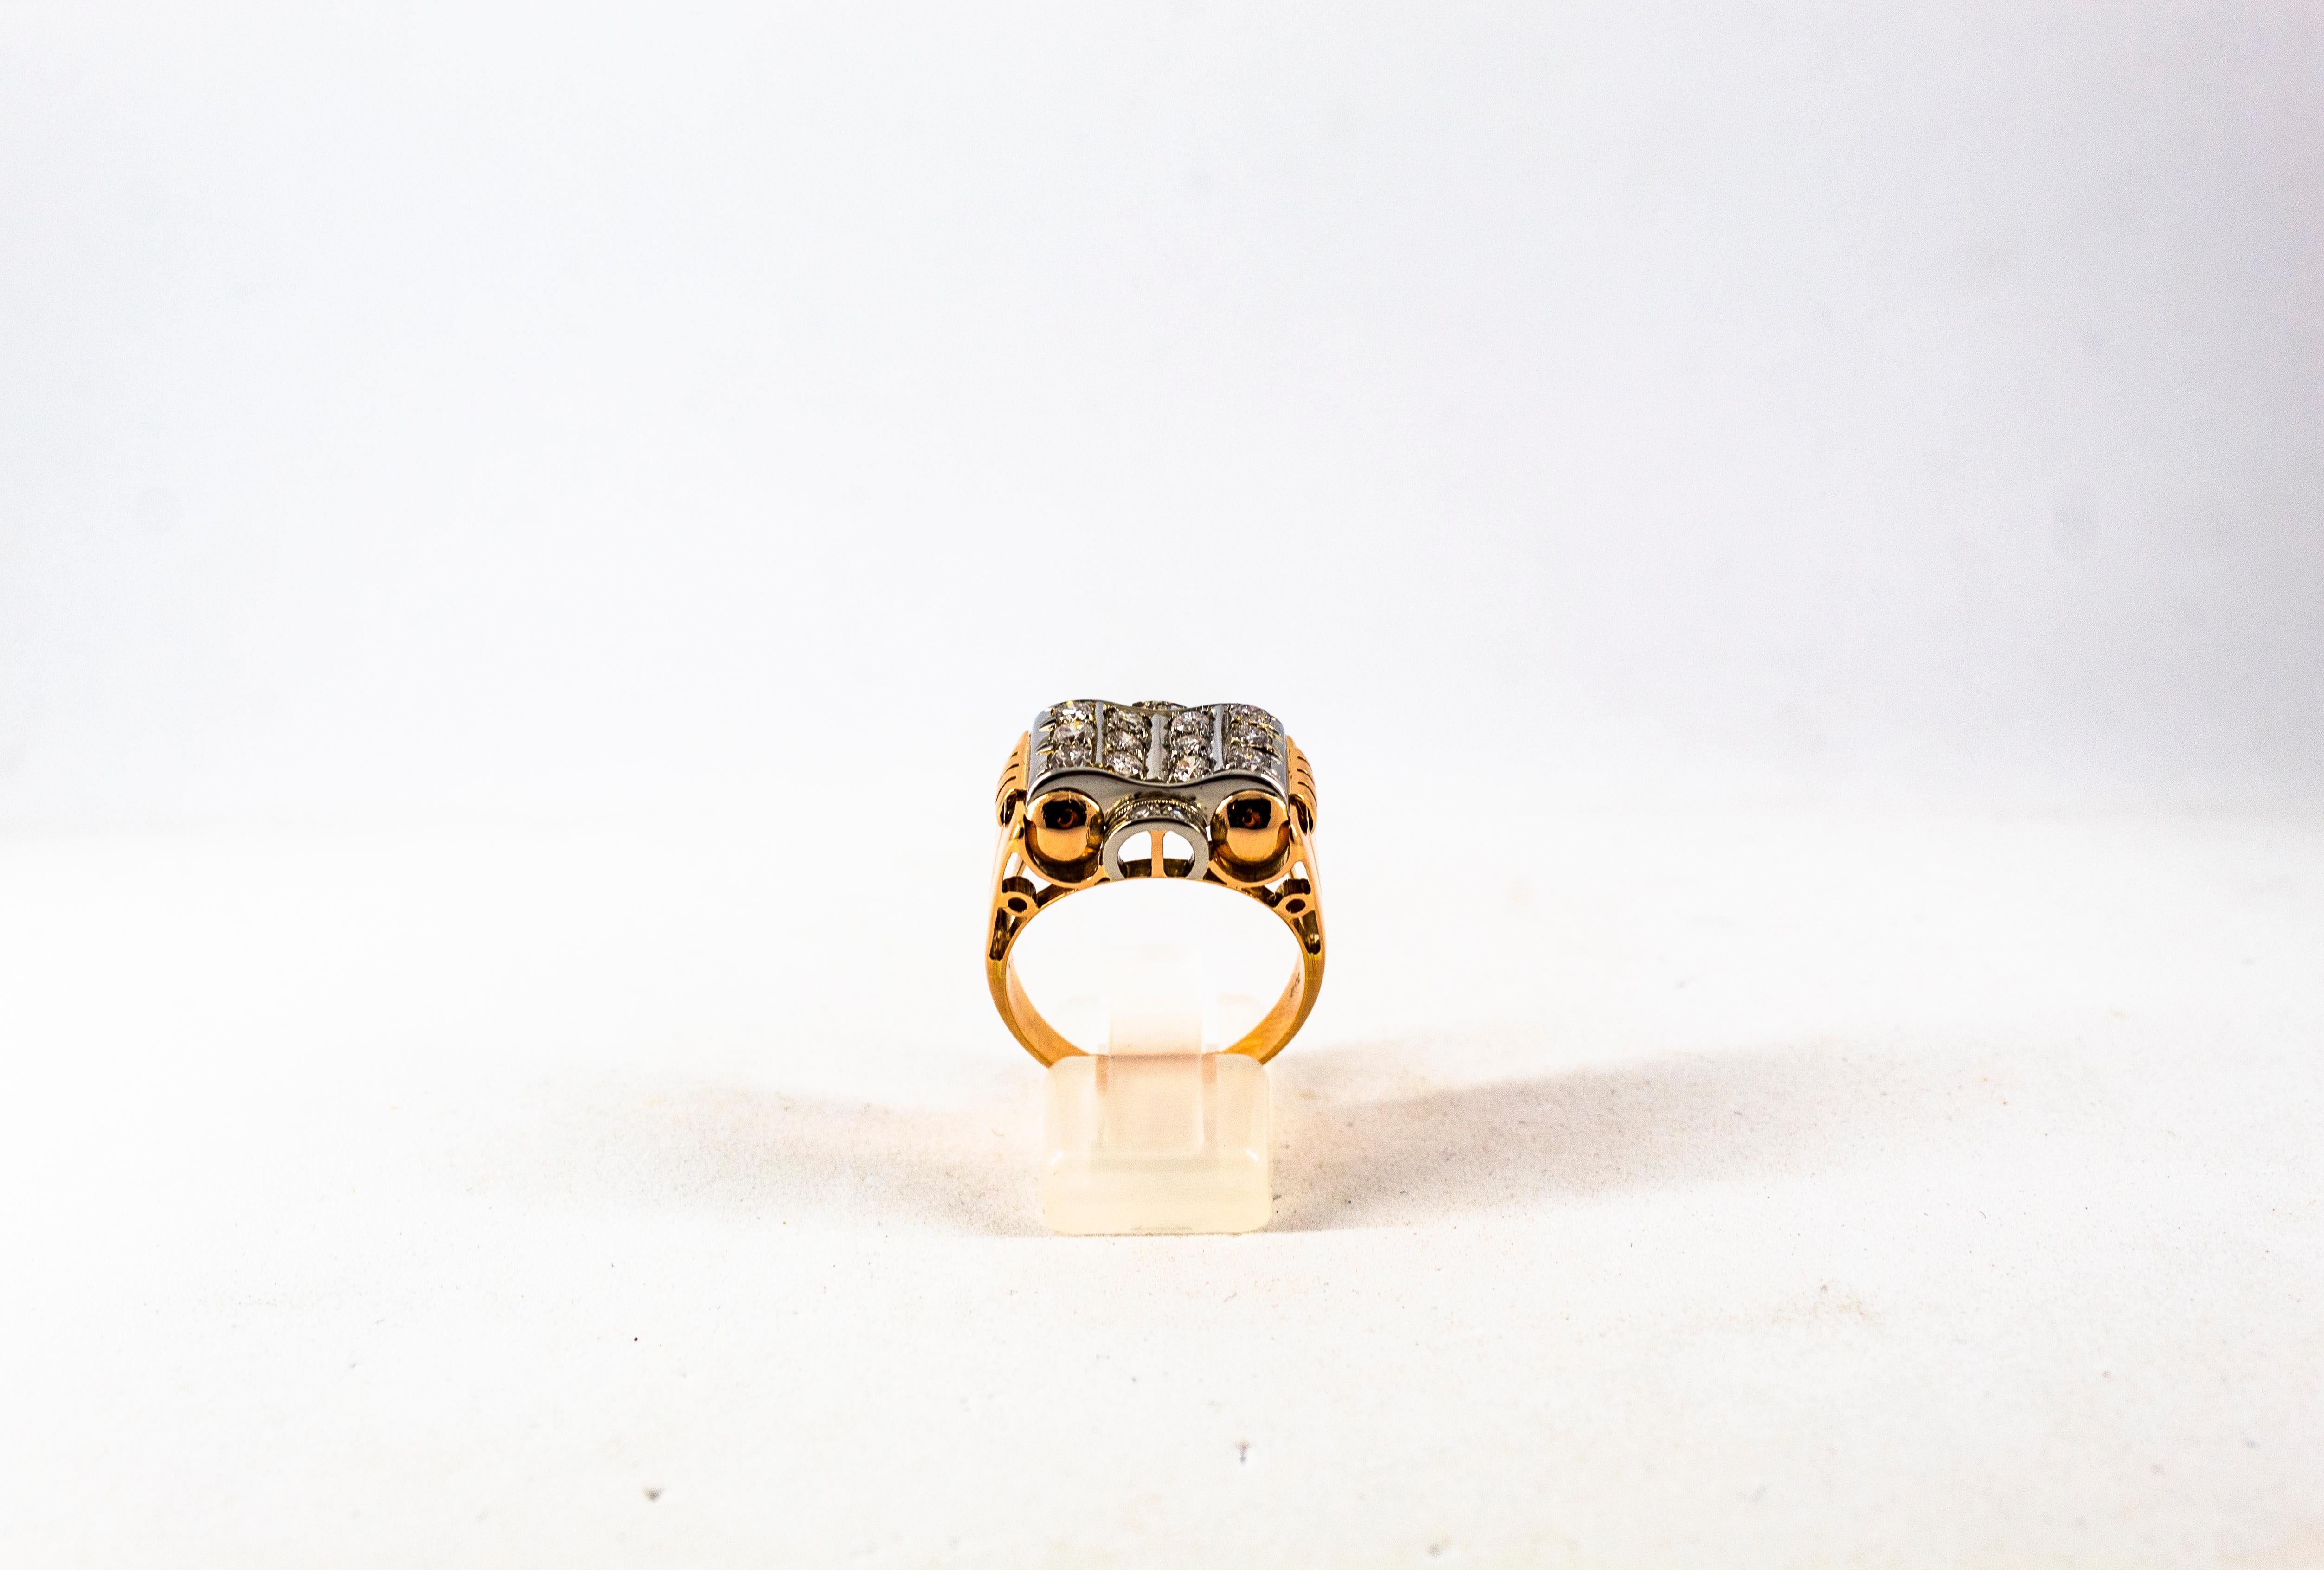 This Ring is made of 18K Yellow Gold.
This Ring has 0.80 Carats White Modern Round Cut Diamonds.
Size ITA: 20 USA: 9
We're a workshop so every piece is handmade, customizable and resizable.